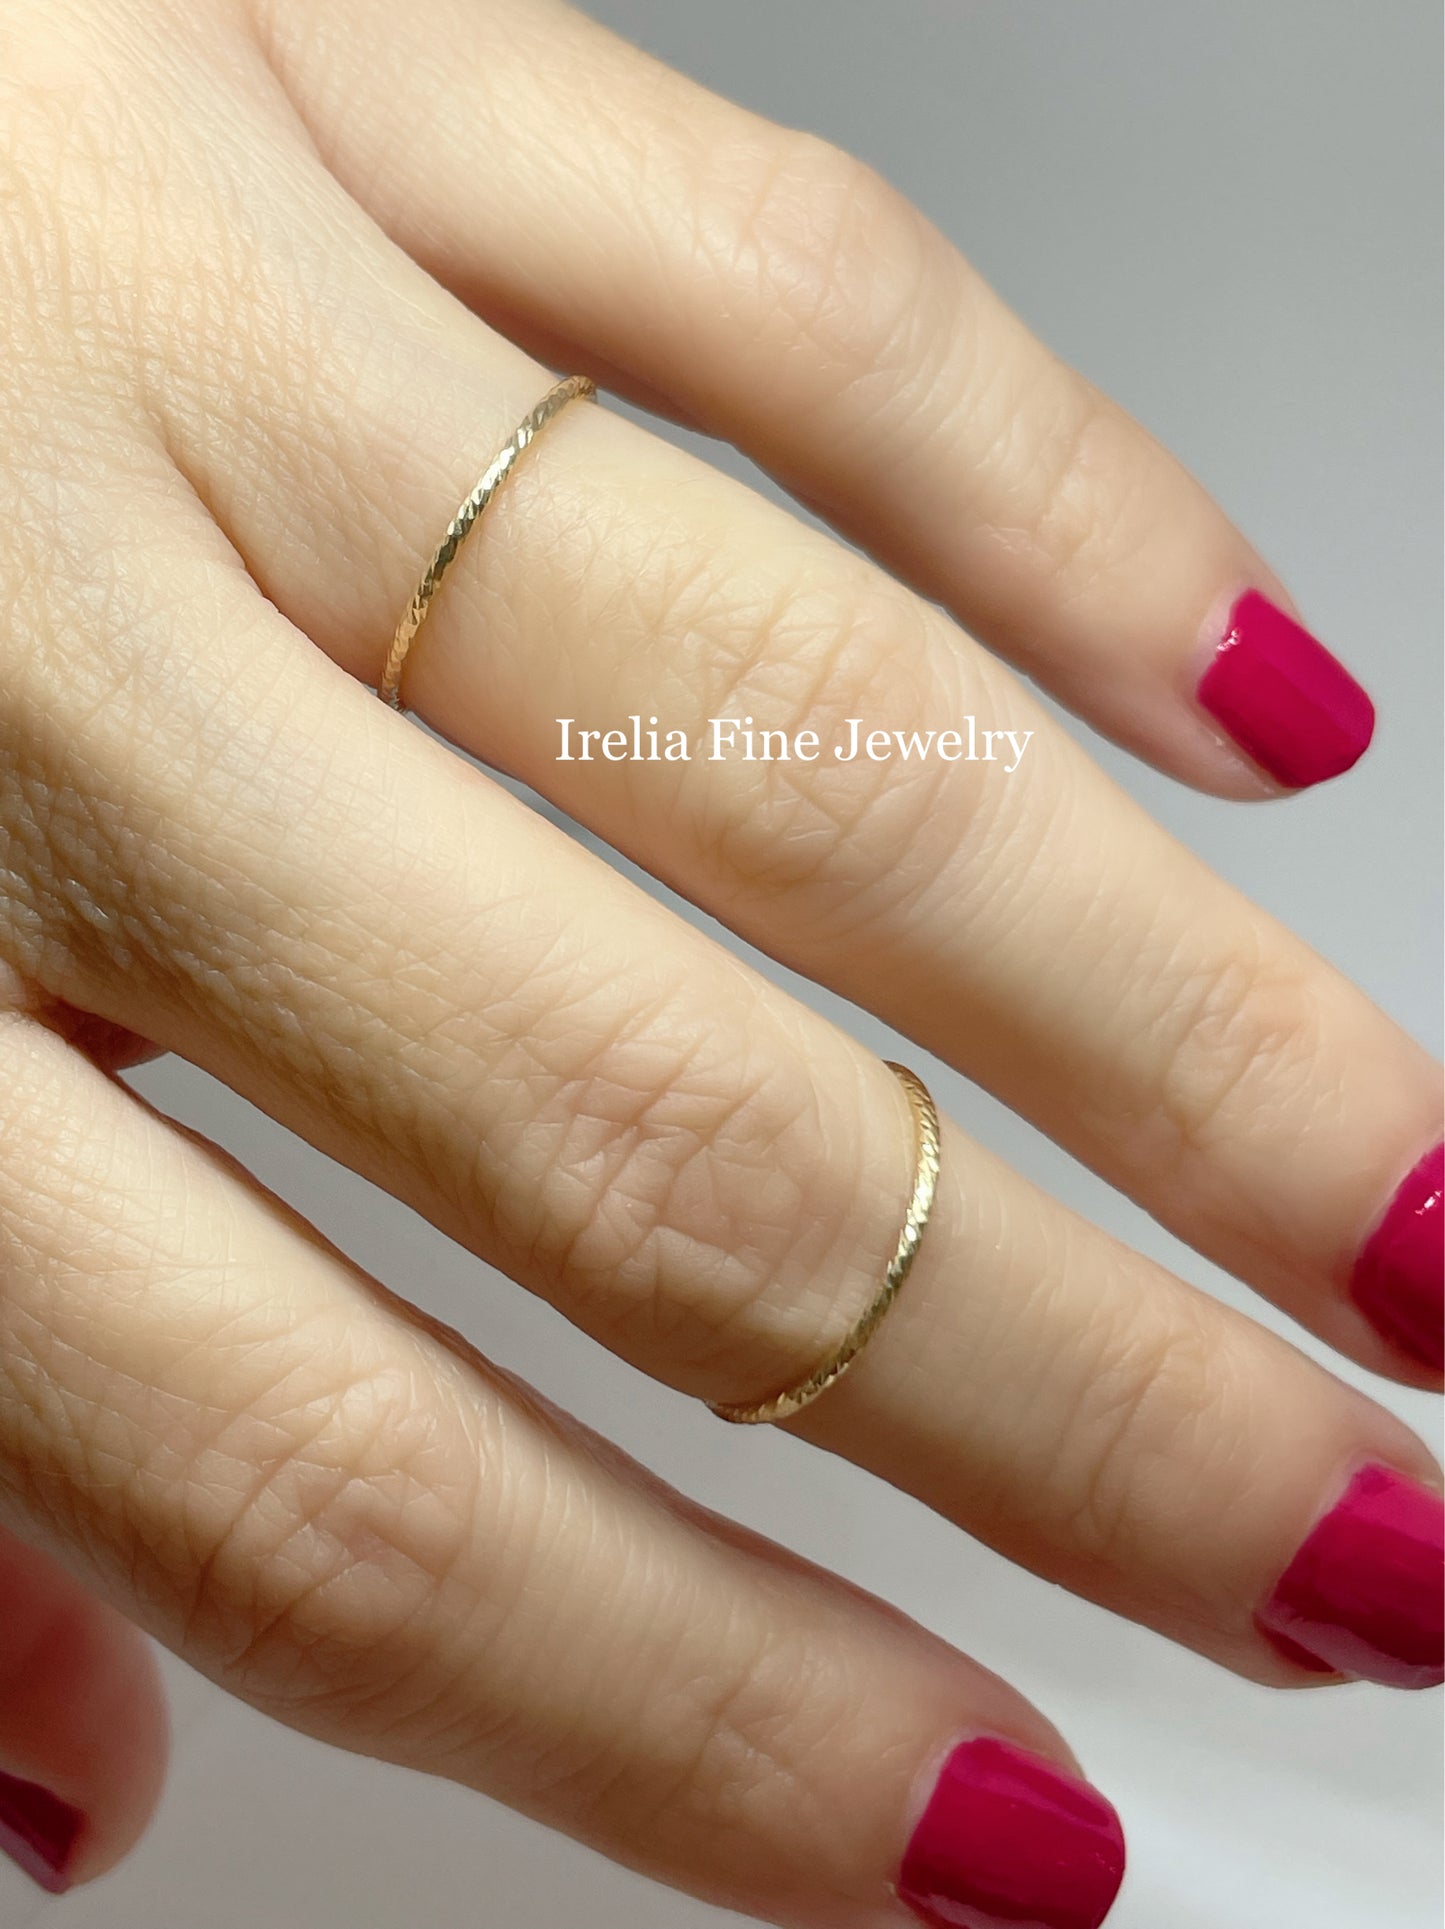 14K Yellow Stackable Ring, Skinny Stackable is 1 mm wide Size 5 -8